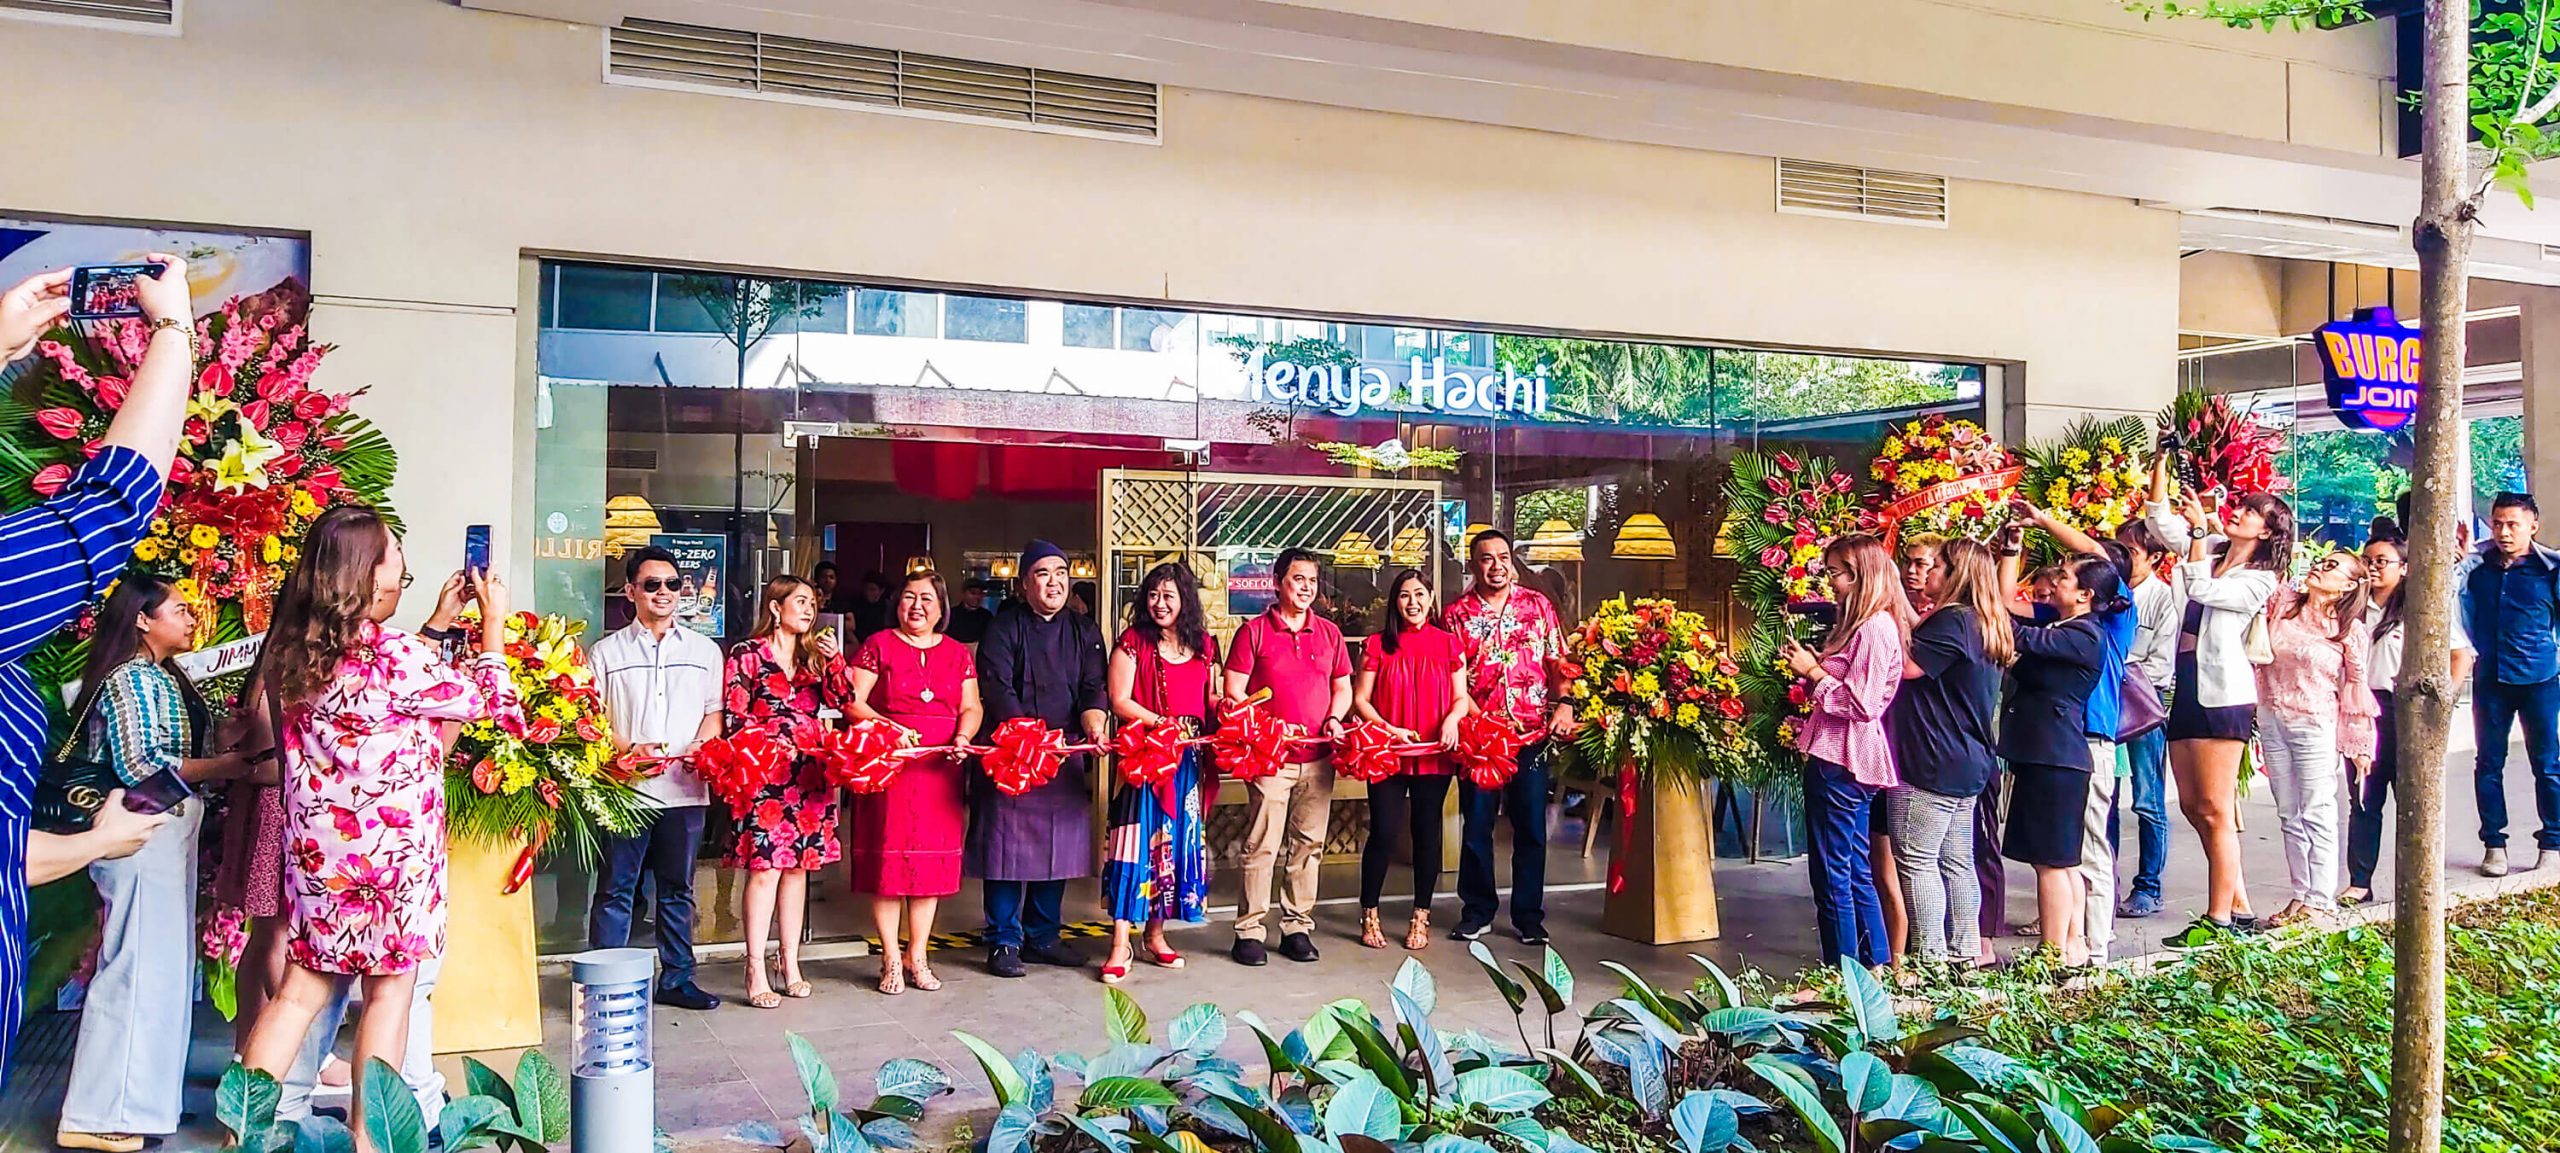 OPENING. Menya Hachi owners, officials, employees, and guests cut the ribbon to open the restaurant located in Ayala Malls Central Bloc in the IT Park.